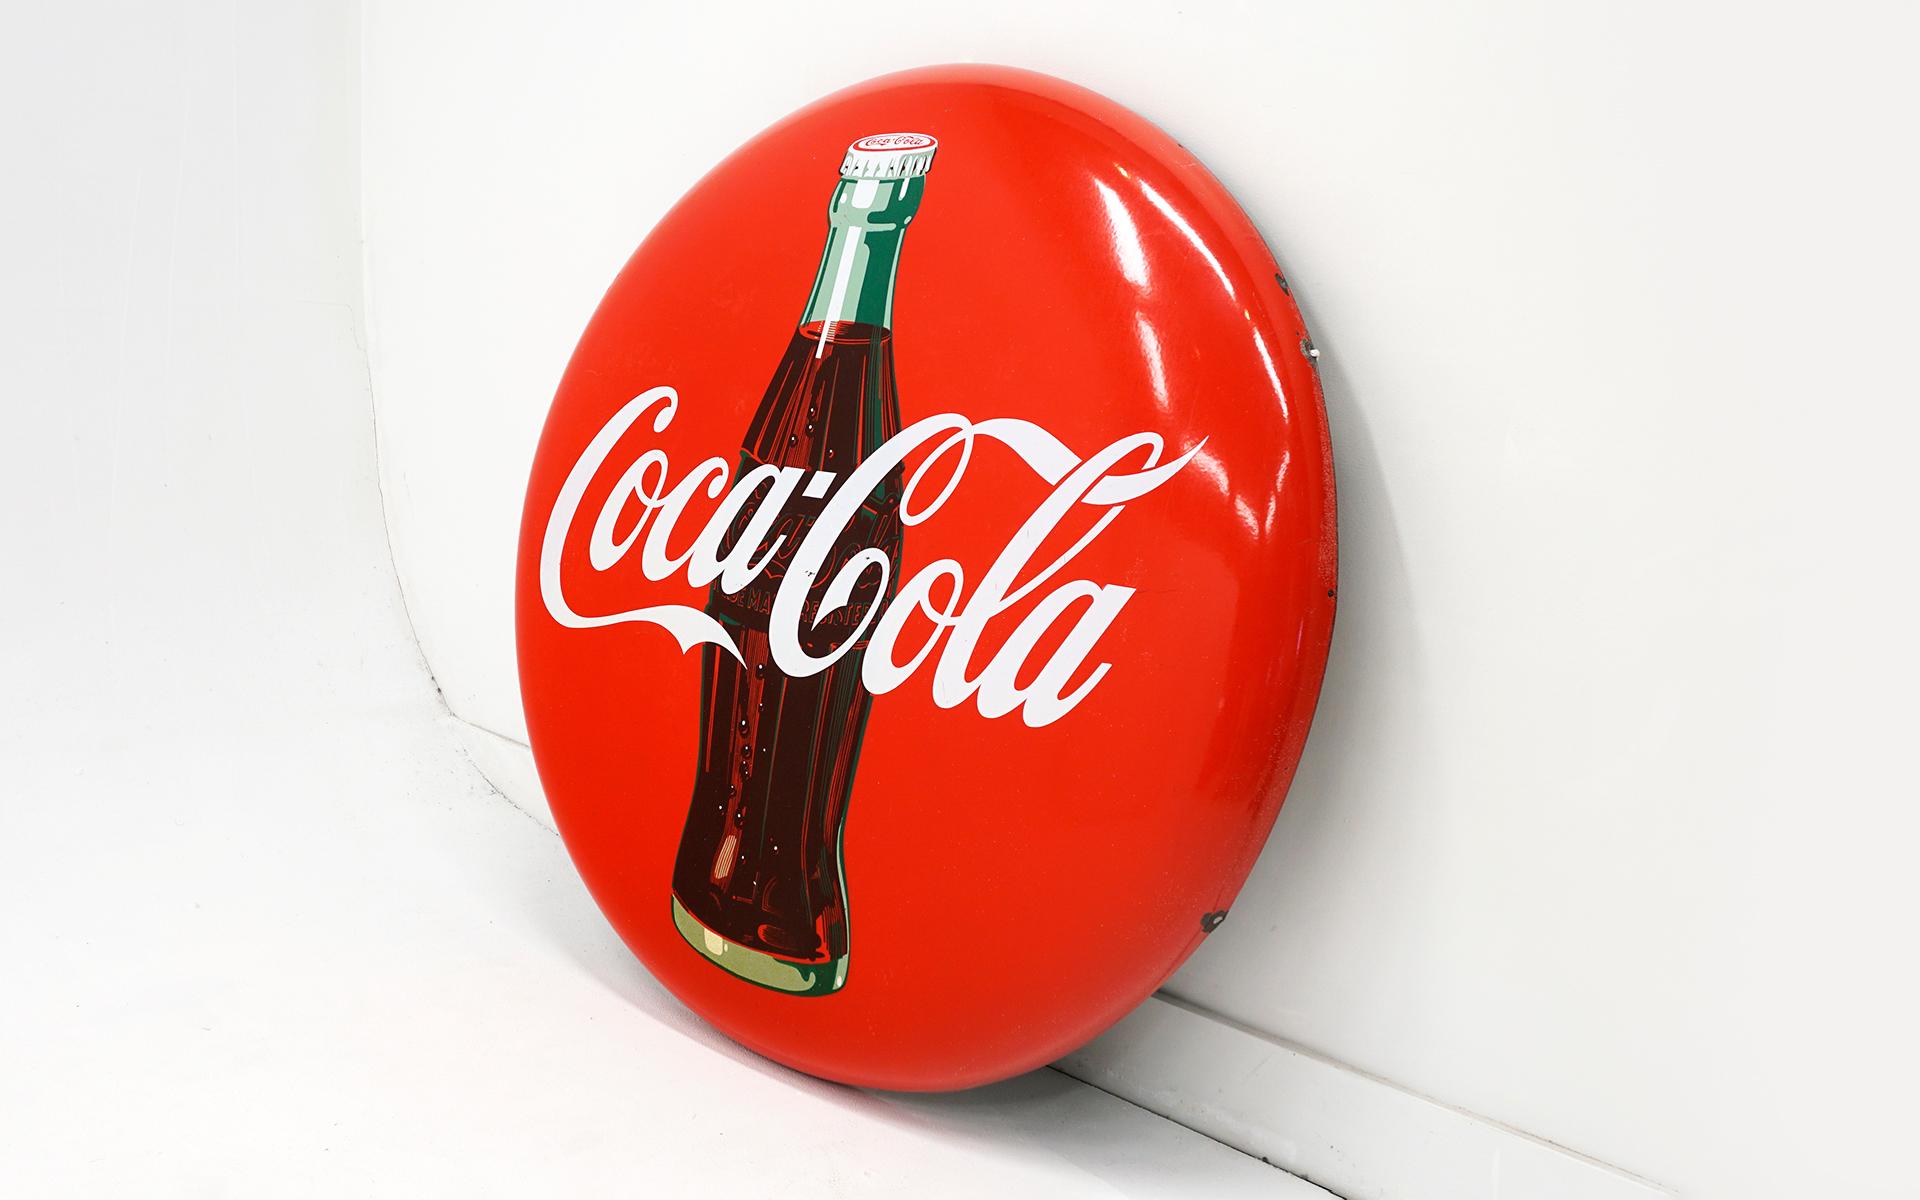 Rare 1950's Coca Cola Button Sign, 48 inches in diameter. Painted metal. Very good condition with few signs of wear around edges as seen in the photos. Ready to display.